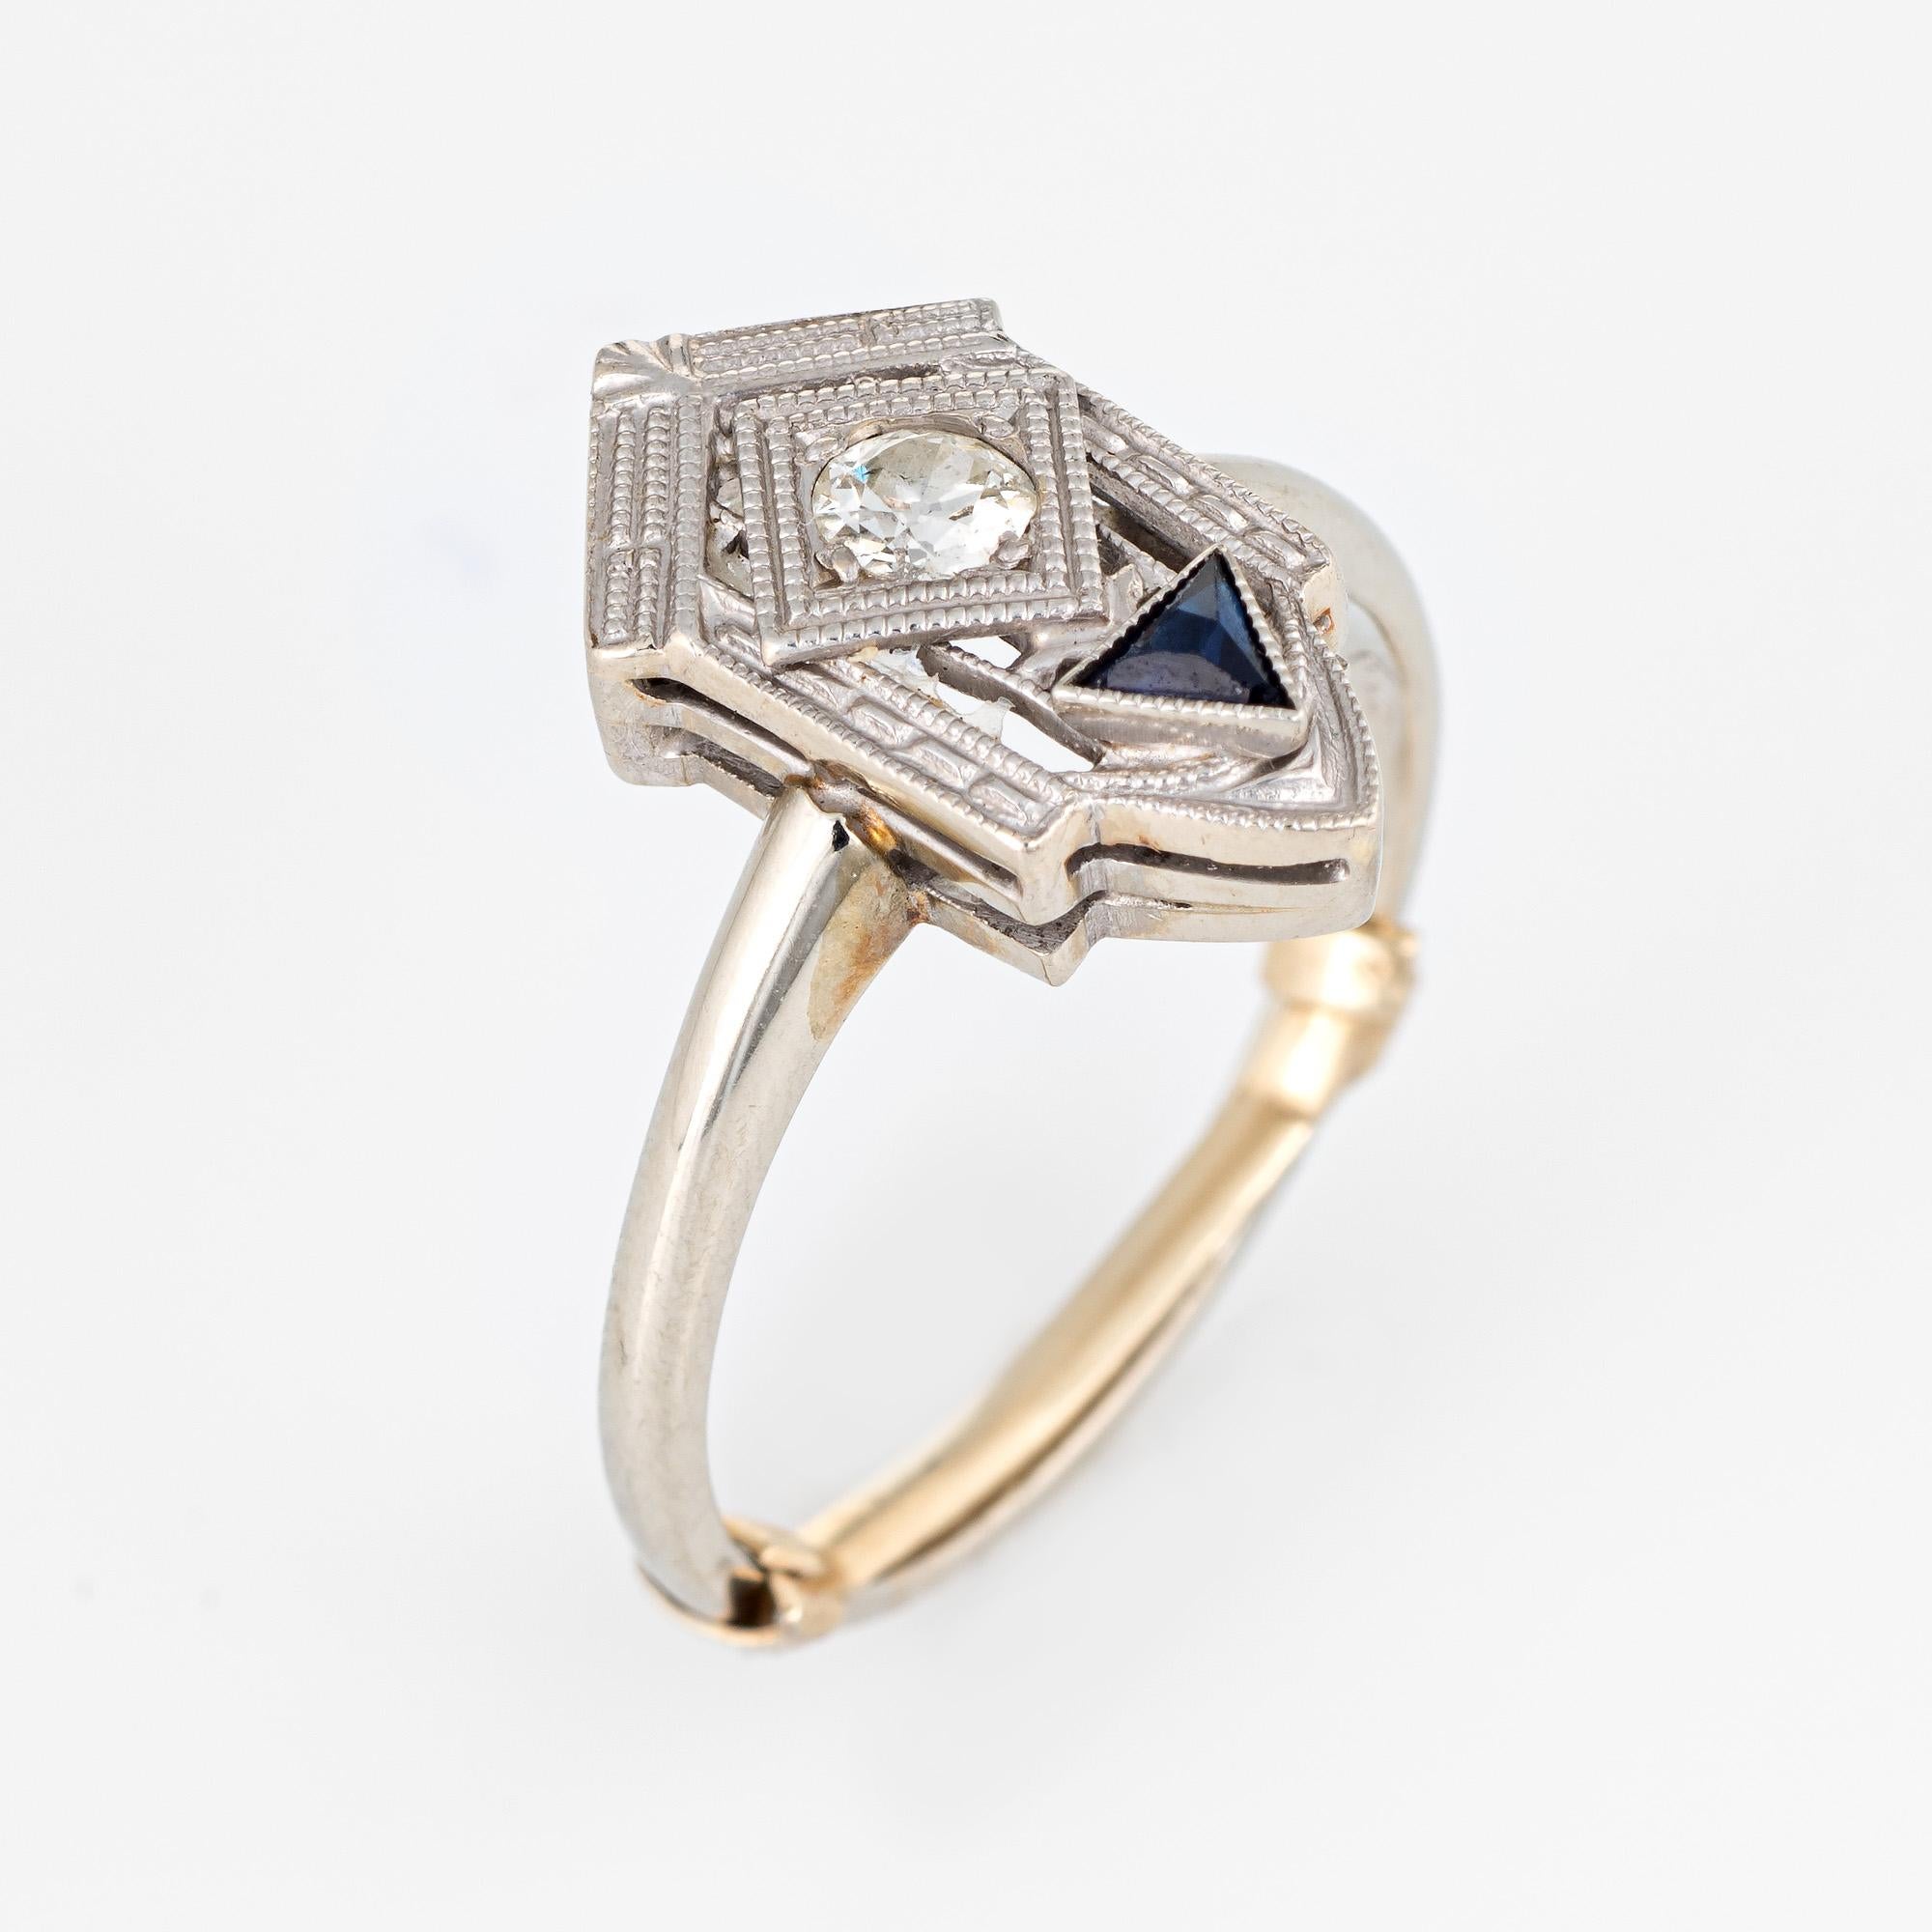 Elegant vintage Art Deco era ring (circa 1920s to 1930s) crafted in 18 karat white gold. 

Centrally mounted old European cut diamond is estimated at 0.15 carats (estimated at H-I color and SI2 clarity). The French cut triangular sapphire is